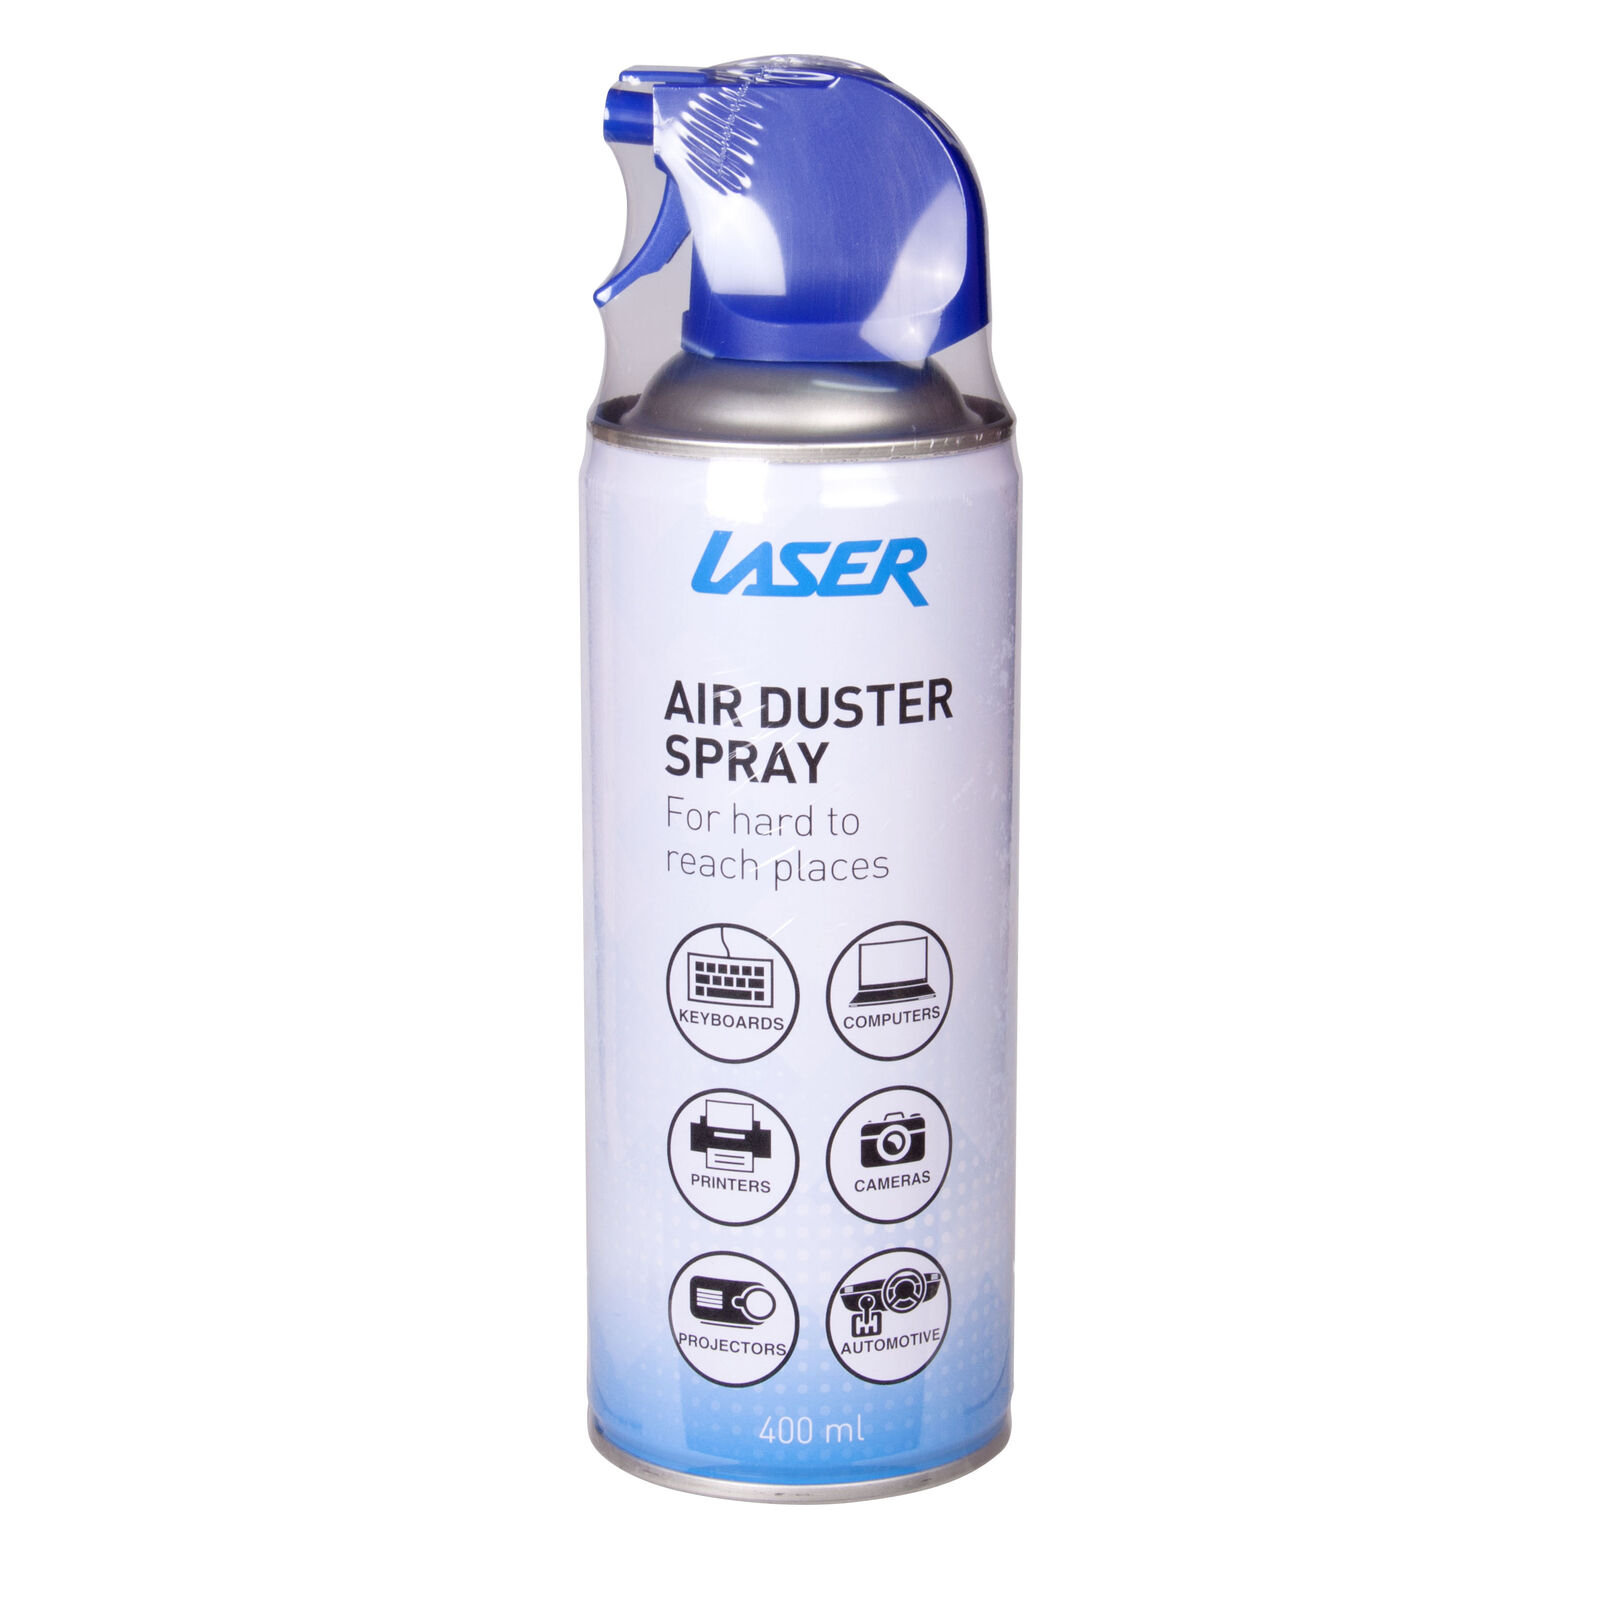 Laser Clean Range Air Duster 400ml - Electronics Dust-Off Spray